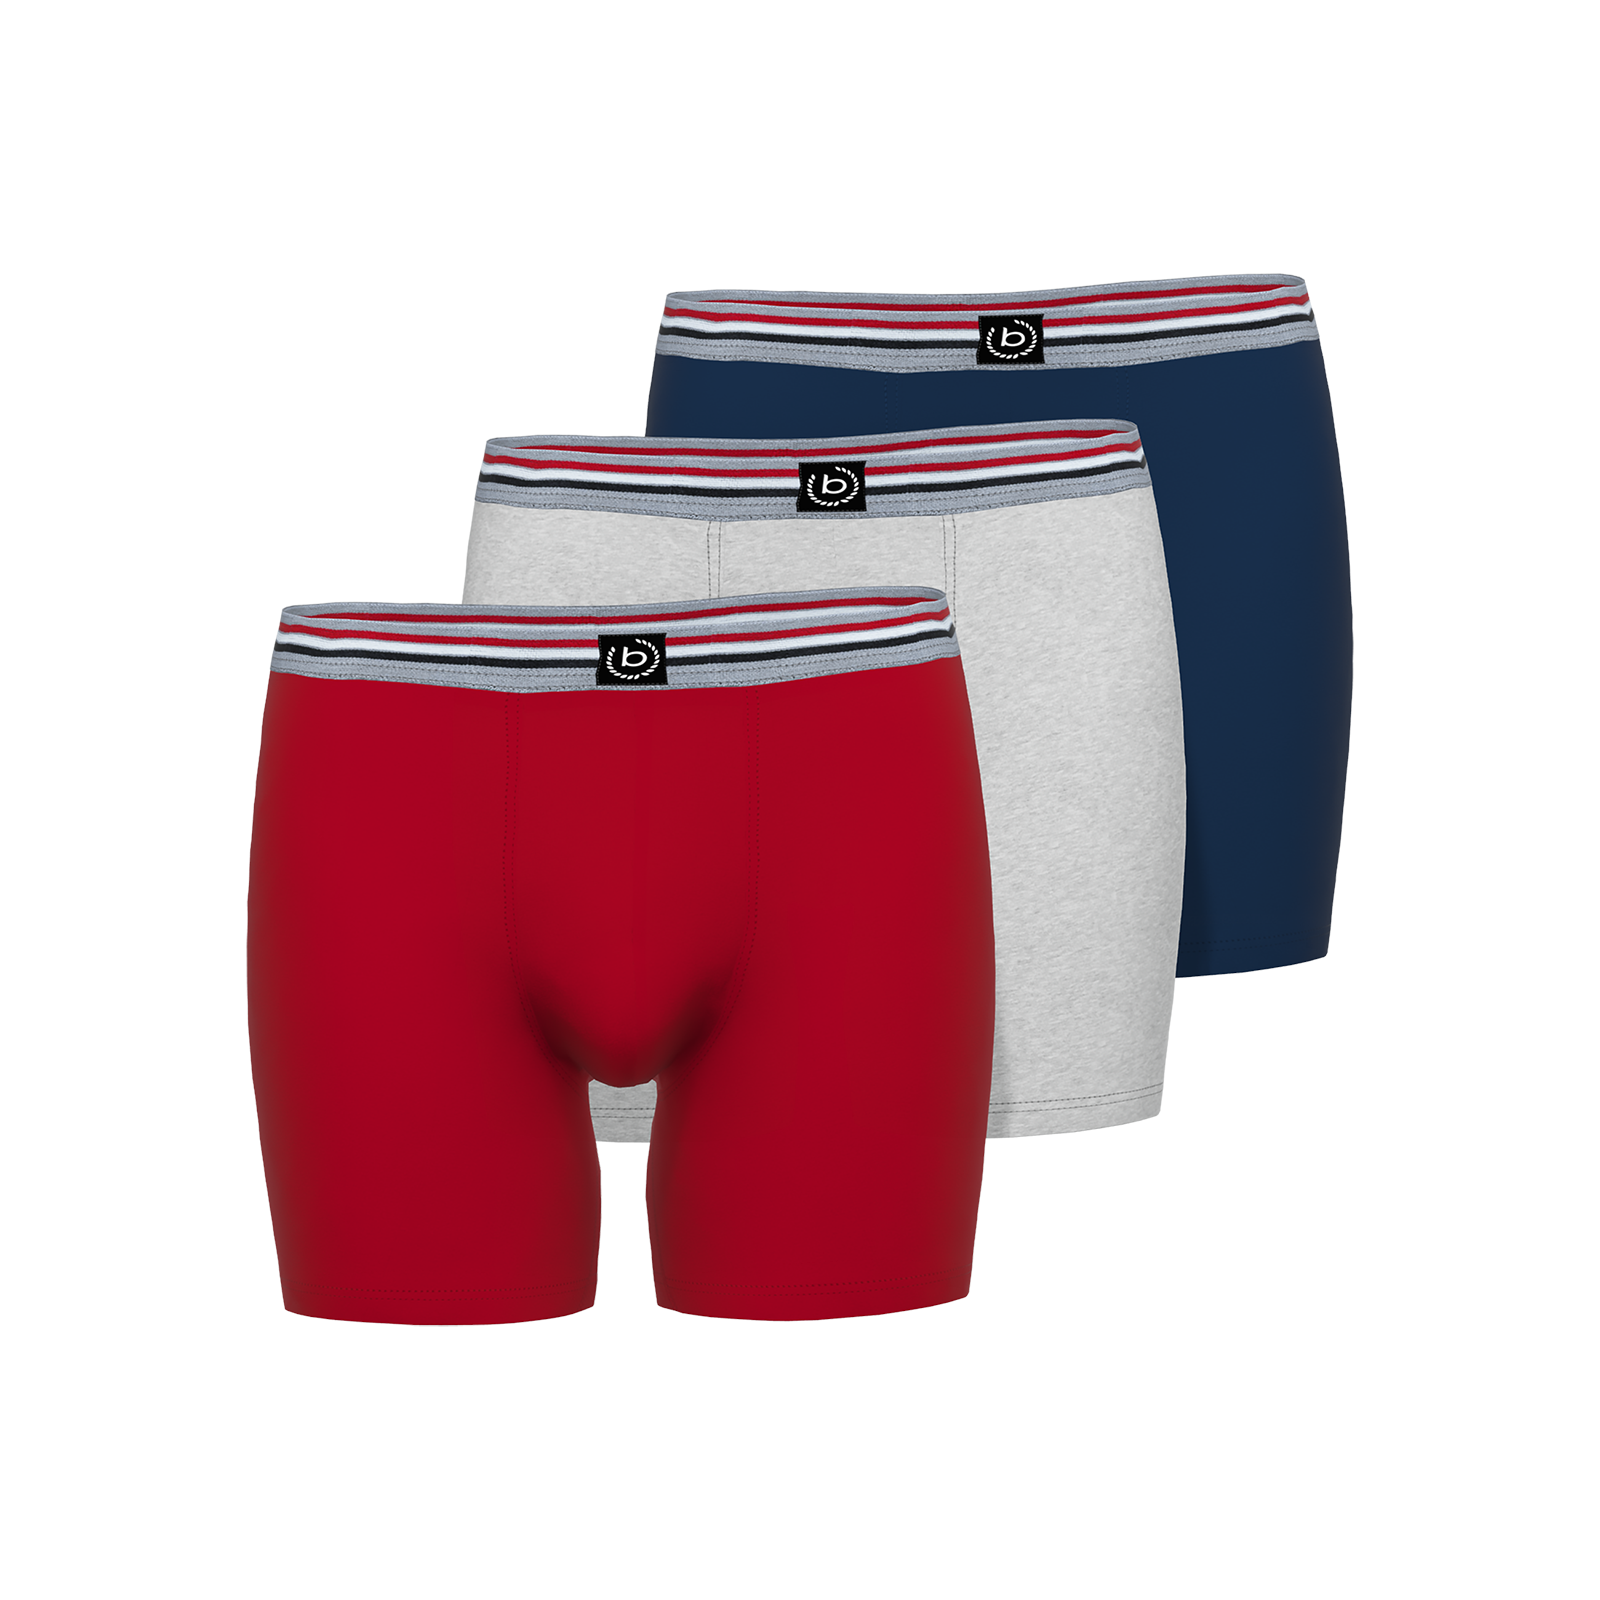 BUGATTI heren boxer normale lengte (3-pack), donkerrood